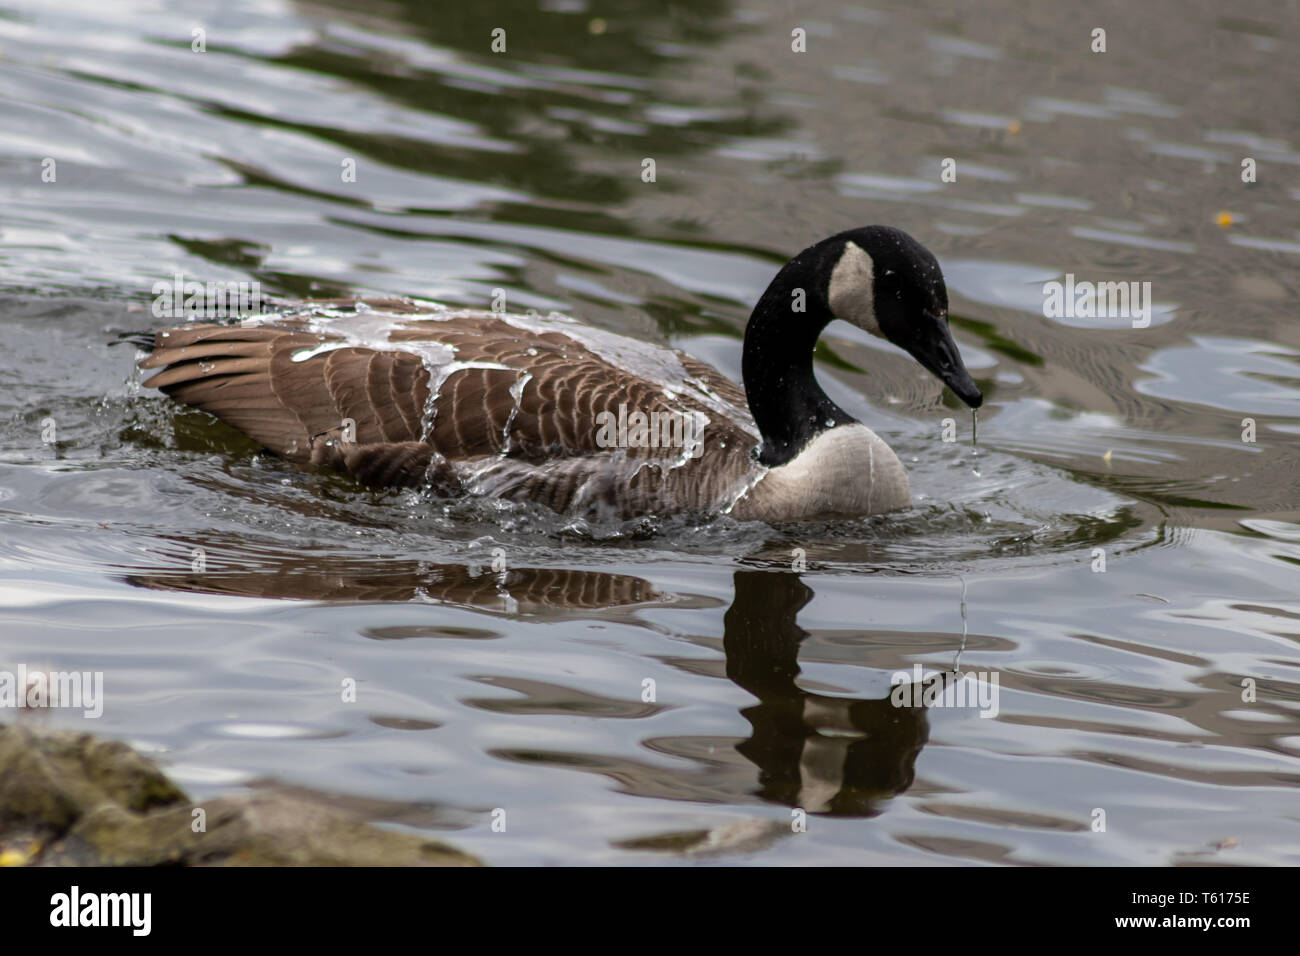 Canada goose cleaning its feathers with a bath in the clear water of a lake  in